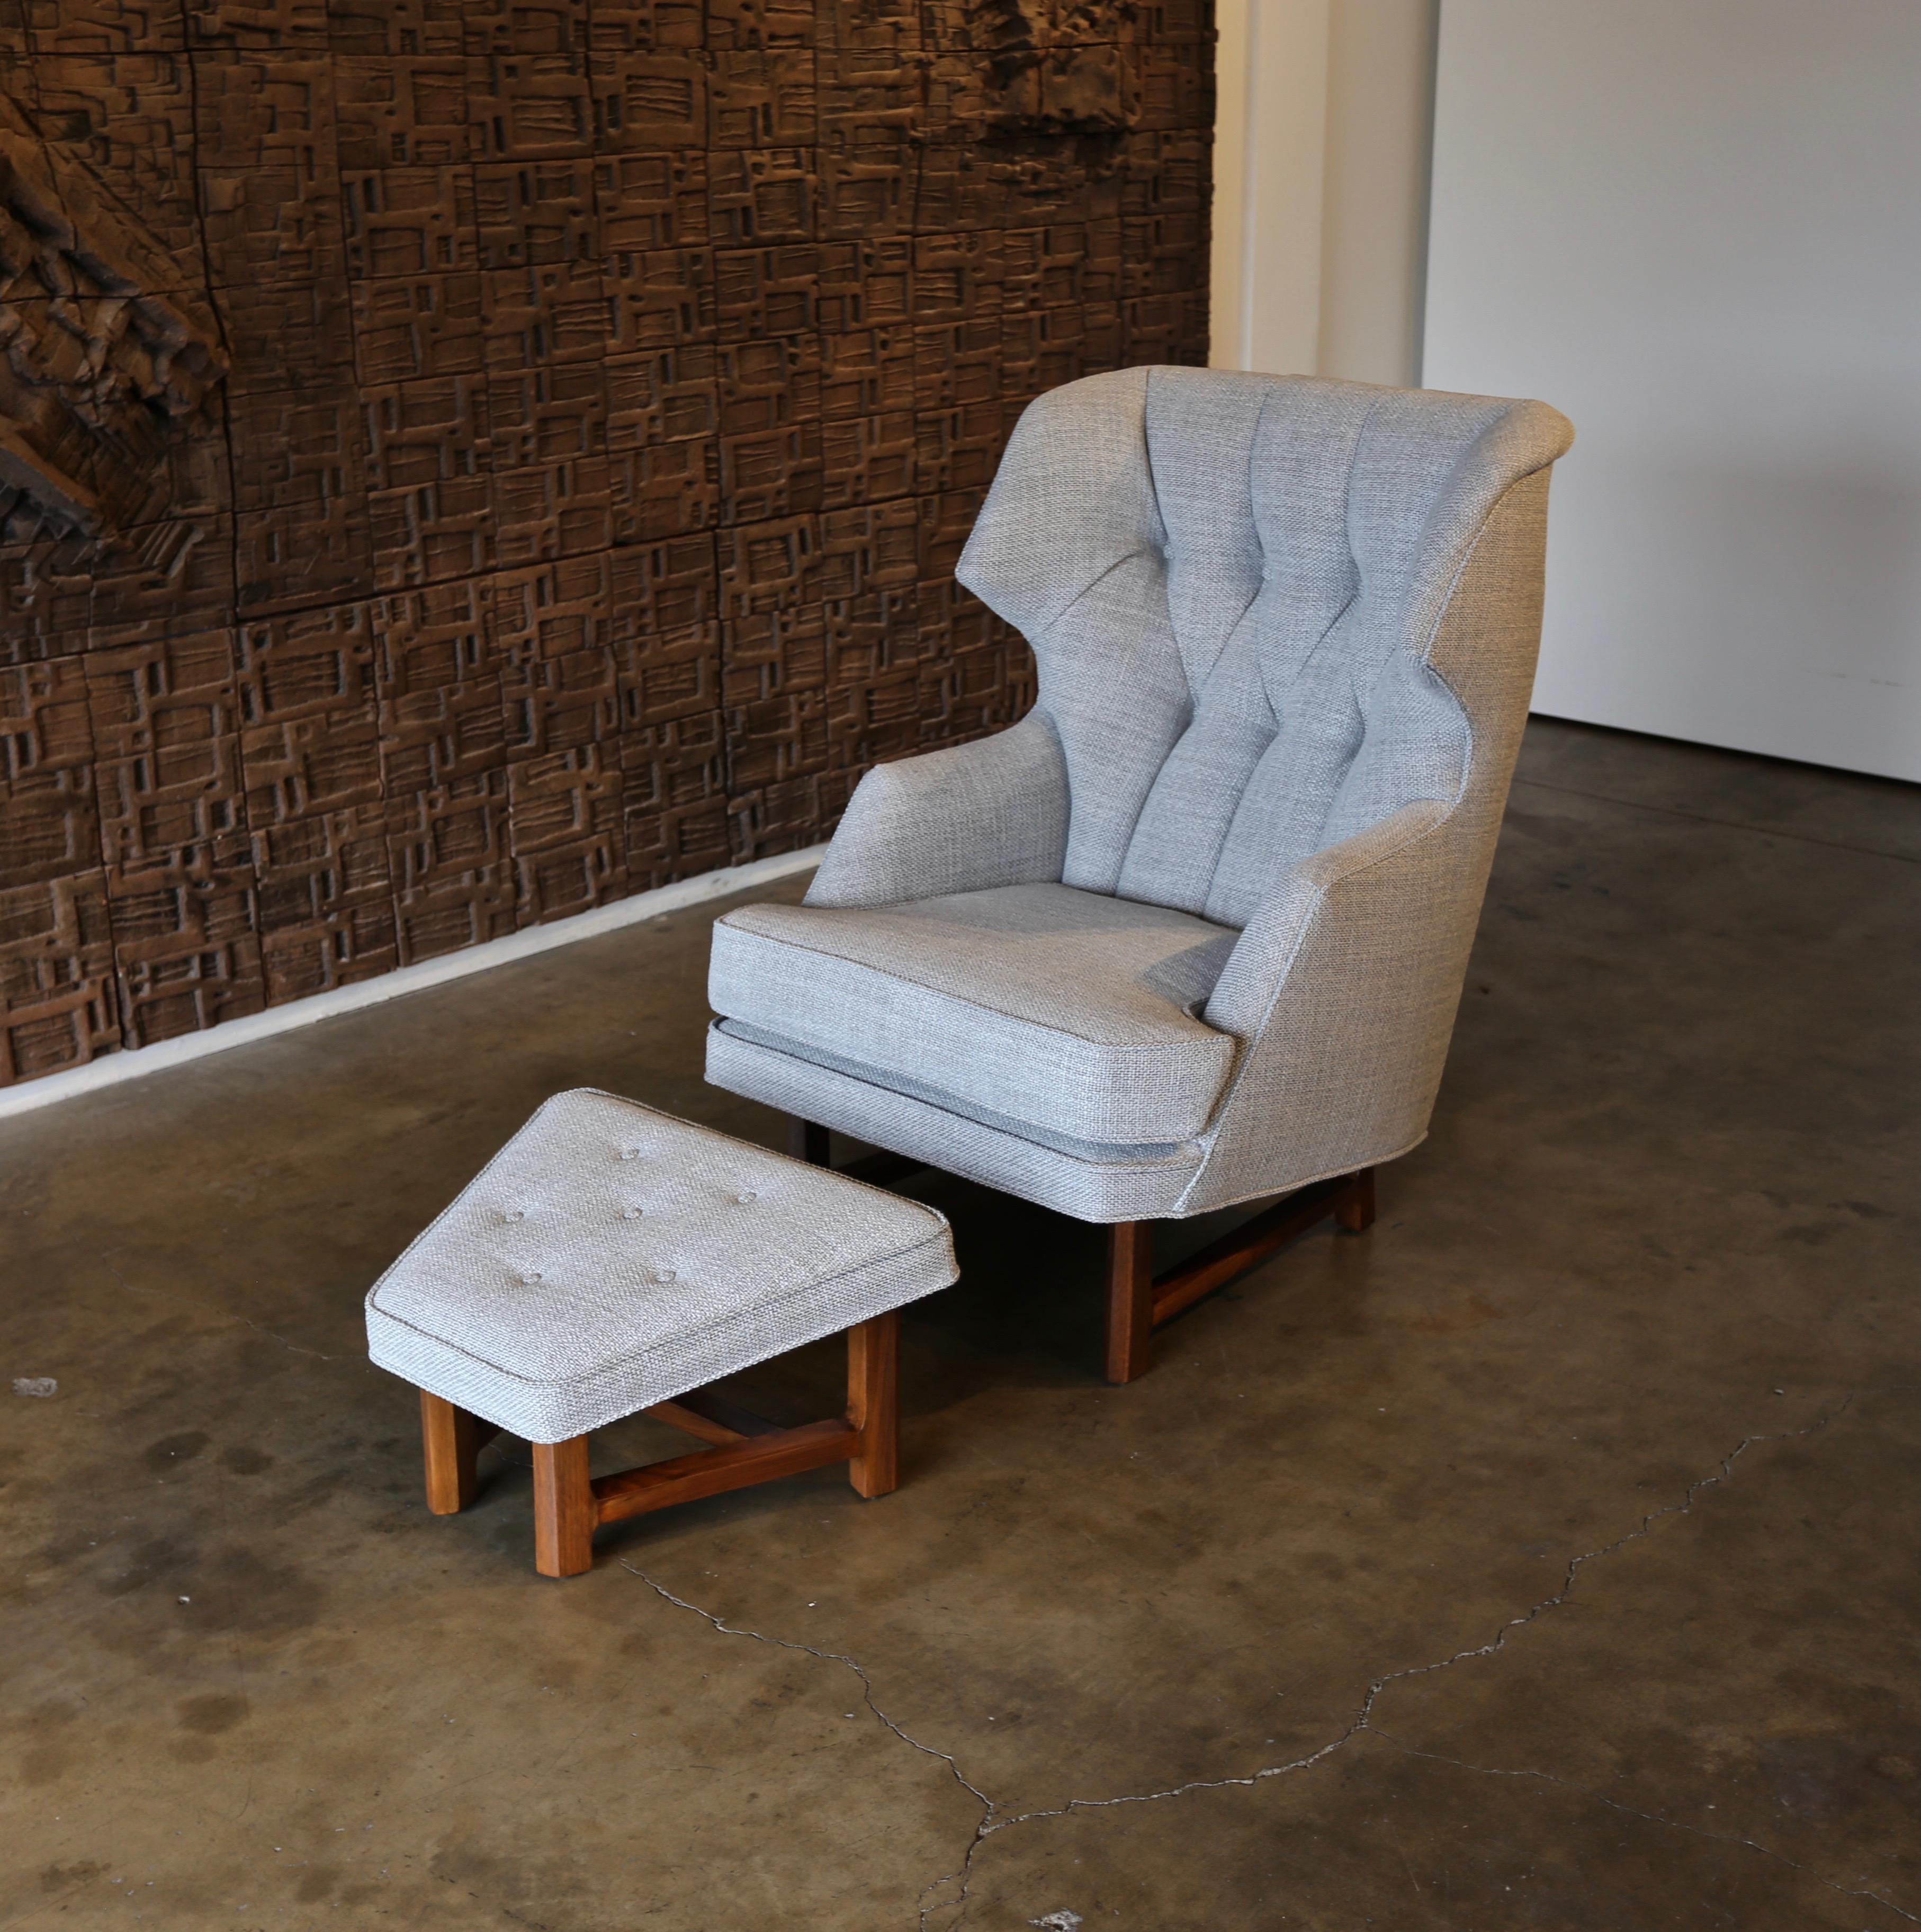 20th Century Janus Wing Chair and Ottoman by Edward Wormley for Dunbar, circa 1957